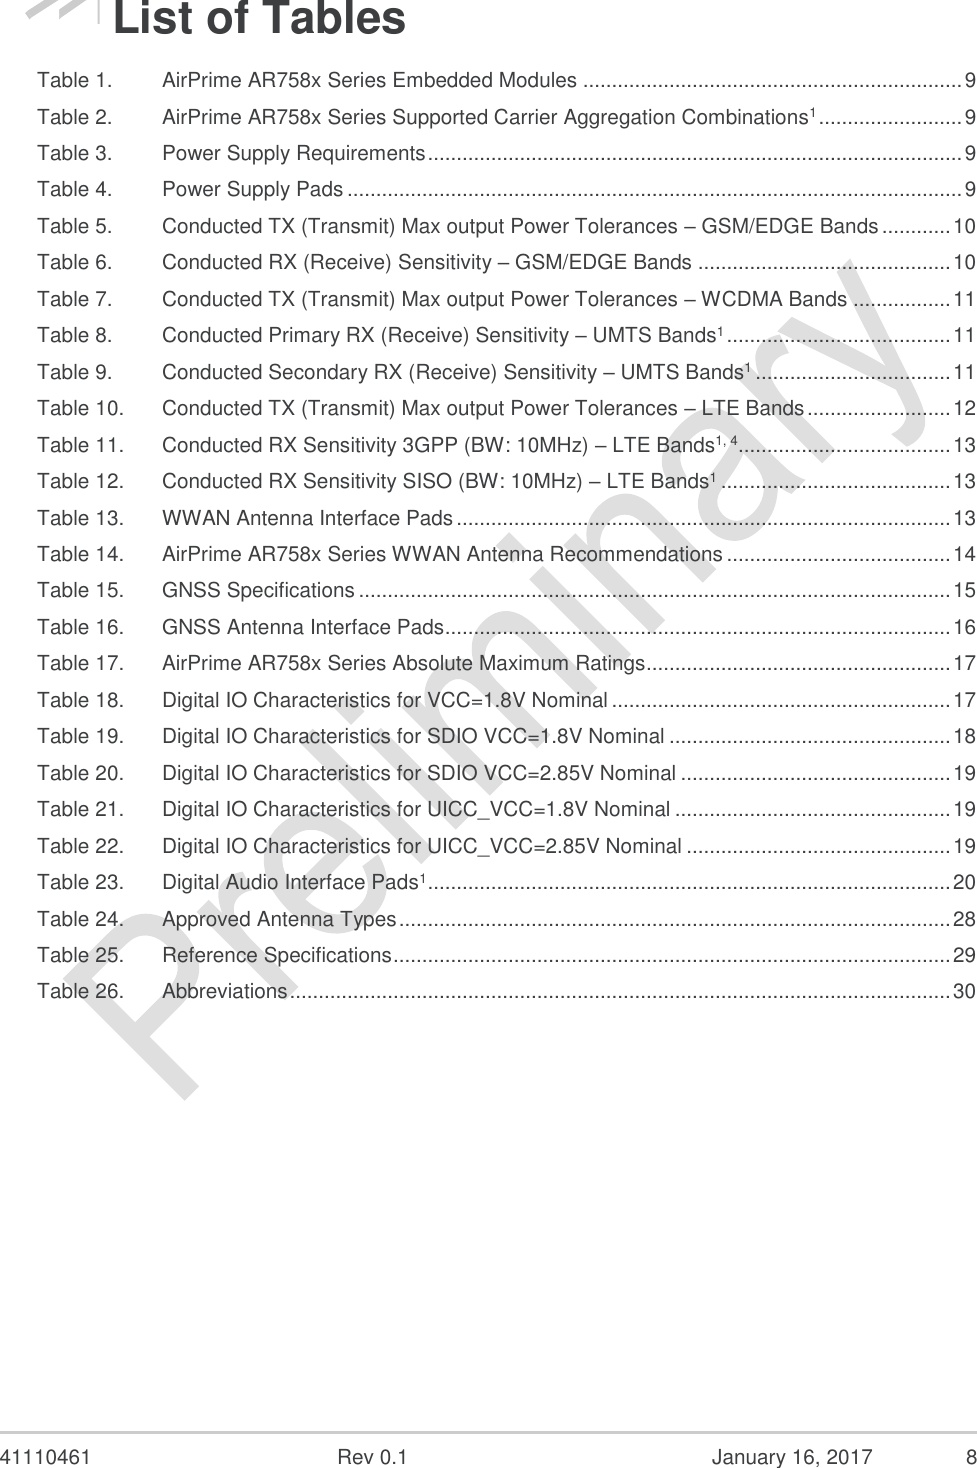  41110461  Rev 0.1  January 16, 2017  8 List of Tables Table 1. AirPrime AR758x Series Embedded Modules .................................................................. 9 Table 2. AirPrime AR758x Series Supported Carrier Aggregation Combinations1 ......................... 9 Table 3. Power Supply Requirements ............................................................................................. 9 Table 4. Power Supply Pads ........................................................................................................... 9 Table 5. Conducted TX (Transmit) Max output Power Tolerances – GSM/EDGE Bands ............ 10 Table 6. Conducted RX (Receive) Sensitivity – GSM/EDGE Bands ............................................ 10 Table 7. Conducted TX (Transmit) Max output Power Tolerances – WCDMA Bands ................. 11 Table 8. Conducted Primary RX (Receive) Sensitivity – UMTS Bands1 ....................................... 11 Table 9. Conducted Secondary RX (Receive) Sensitivity – UMTS Bands1 .................................. 11 Table 10. Conducted TX (Transmit) Max output Power Tolerances – LTE Bands ......................... 12 Table 11. Conducted RX Sensitivity 3GPP (BW: 10MHz) – LTE Bands1, 4..................................... 13 Table 12. Conducted RX Sensitivity SISO (BW: 10MHz) – LTE Bands1 ........................................ 13 Table 13. WWAN Antenna Interface Pads ...................................................................................... 13 Table 14. AirPrime AR758x Series WWAN Antenna Recommendations ....................................... 14 Table 15. GNSS Specifications ....................................................................................................... 15 Table 16. GNSS Antenna Interface Pads ........................................................................................ 16 Table 17. AirPrime AR758x Series Absolute Maximum Ratings..................................................... 17 Table 18. Digital IO Characteristics for VCC=1.8V Nominal ........................................................... 17 Table 19. Digital IO Characteristics for SDIO VCC=1.8V Nominal ................................................. 18 Table 20. Digital IO Characteristics for SDIO VCC=2.85V Nominal ............................................... 19 Table 21. Digital IO Characteristics for UICC_VCC=1.8V Nominal ................................................ 19 Table 22. Digital IO Characteristics for UICC_VCC=2.85V Nominal .............................................. 19 Table 23. Digital Audio Interface Pads1 ........................................................................................... 20 Table 24. Approved Antenna Types ................................................................................................ 28 Table 25. Reference Specifications ................................................................................................. 29 Table 26. Abbreviations ................................................................................................................... 30  